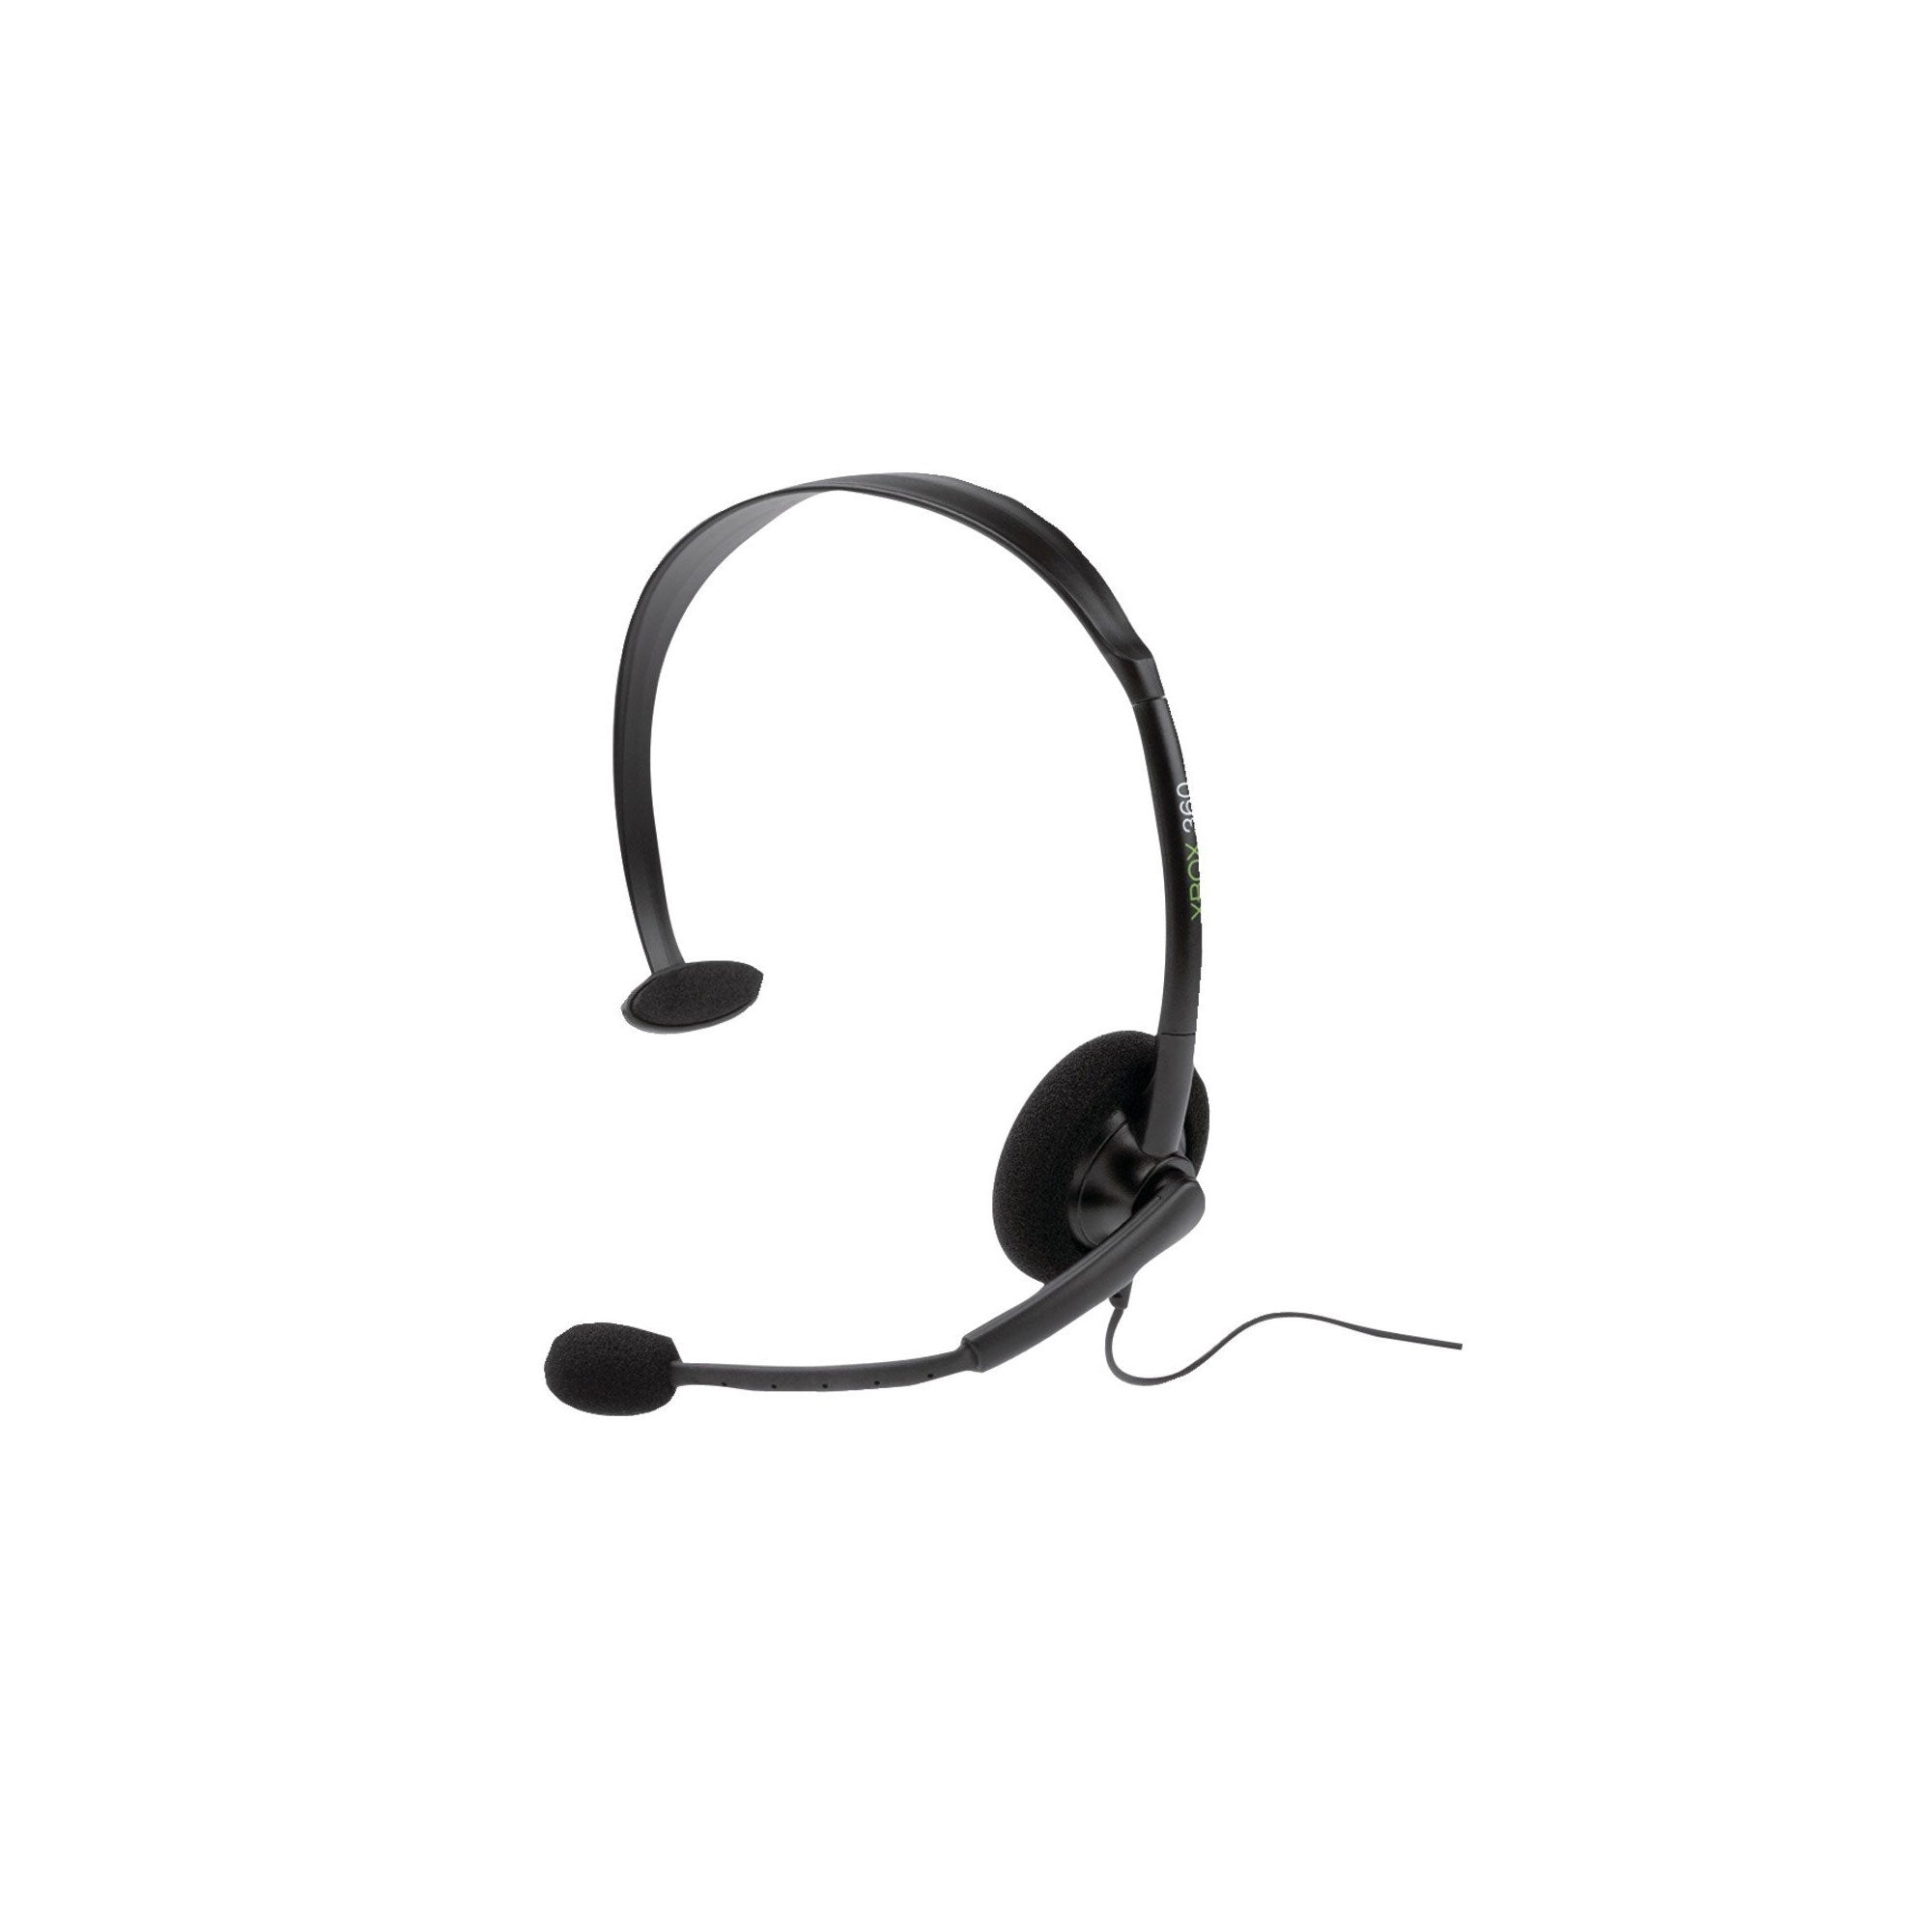 Microsoft Chat Headset for Xbox 360 Gaming Consoles